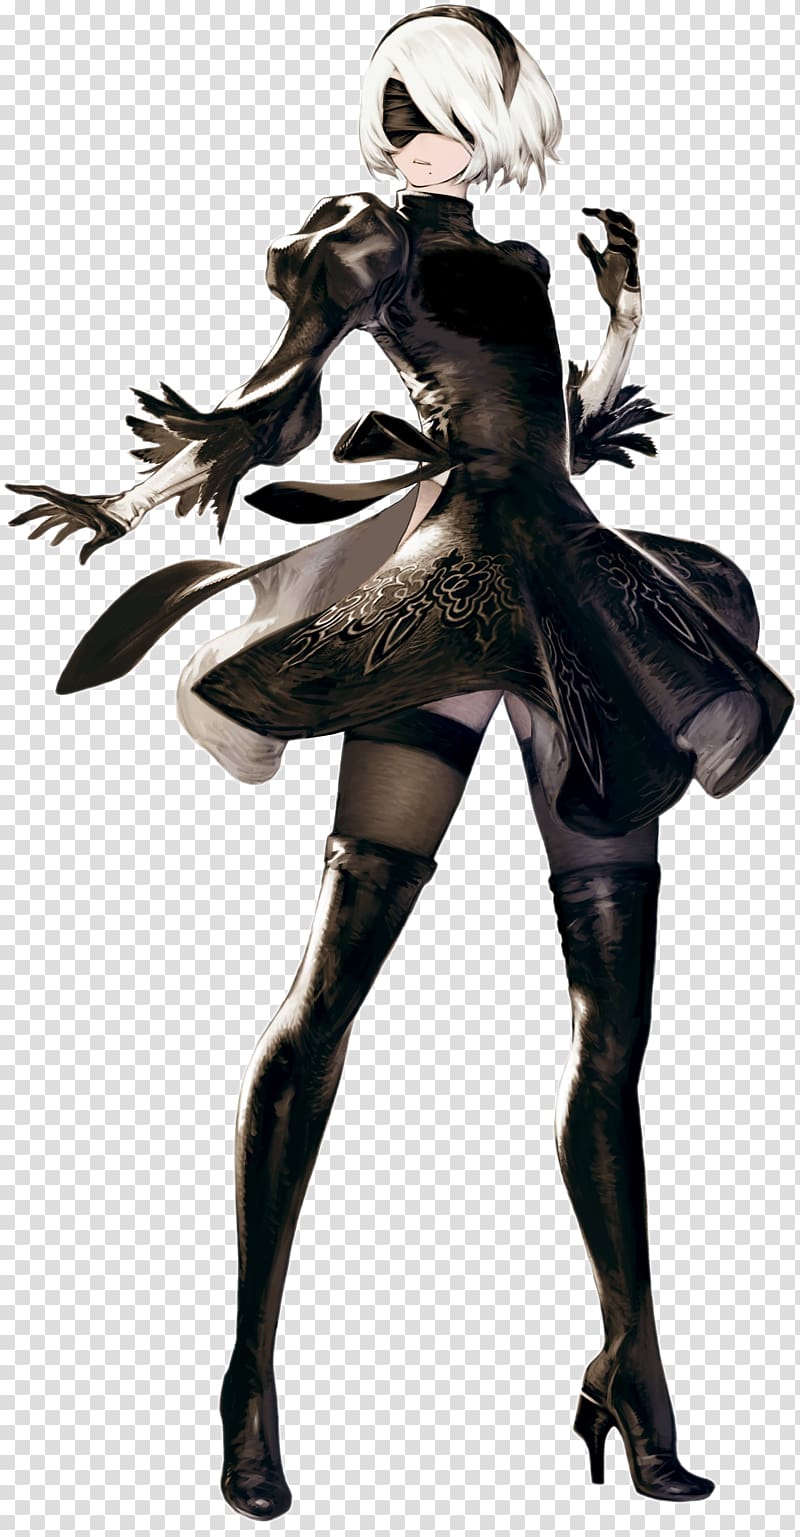 Nier: Automata Drakengard Bravely Default Valkyrie Anatomia: The Origin, others transparent background PNG clipart